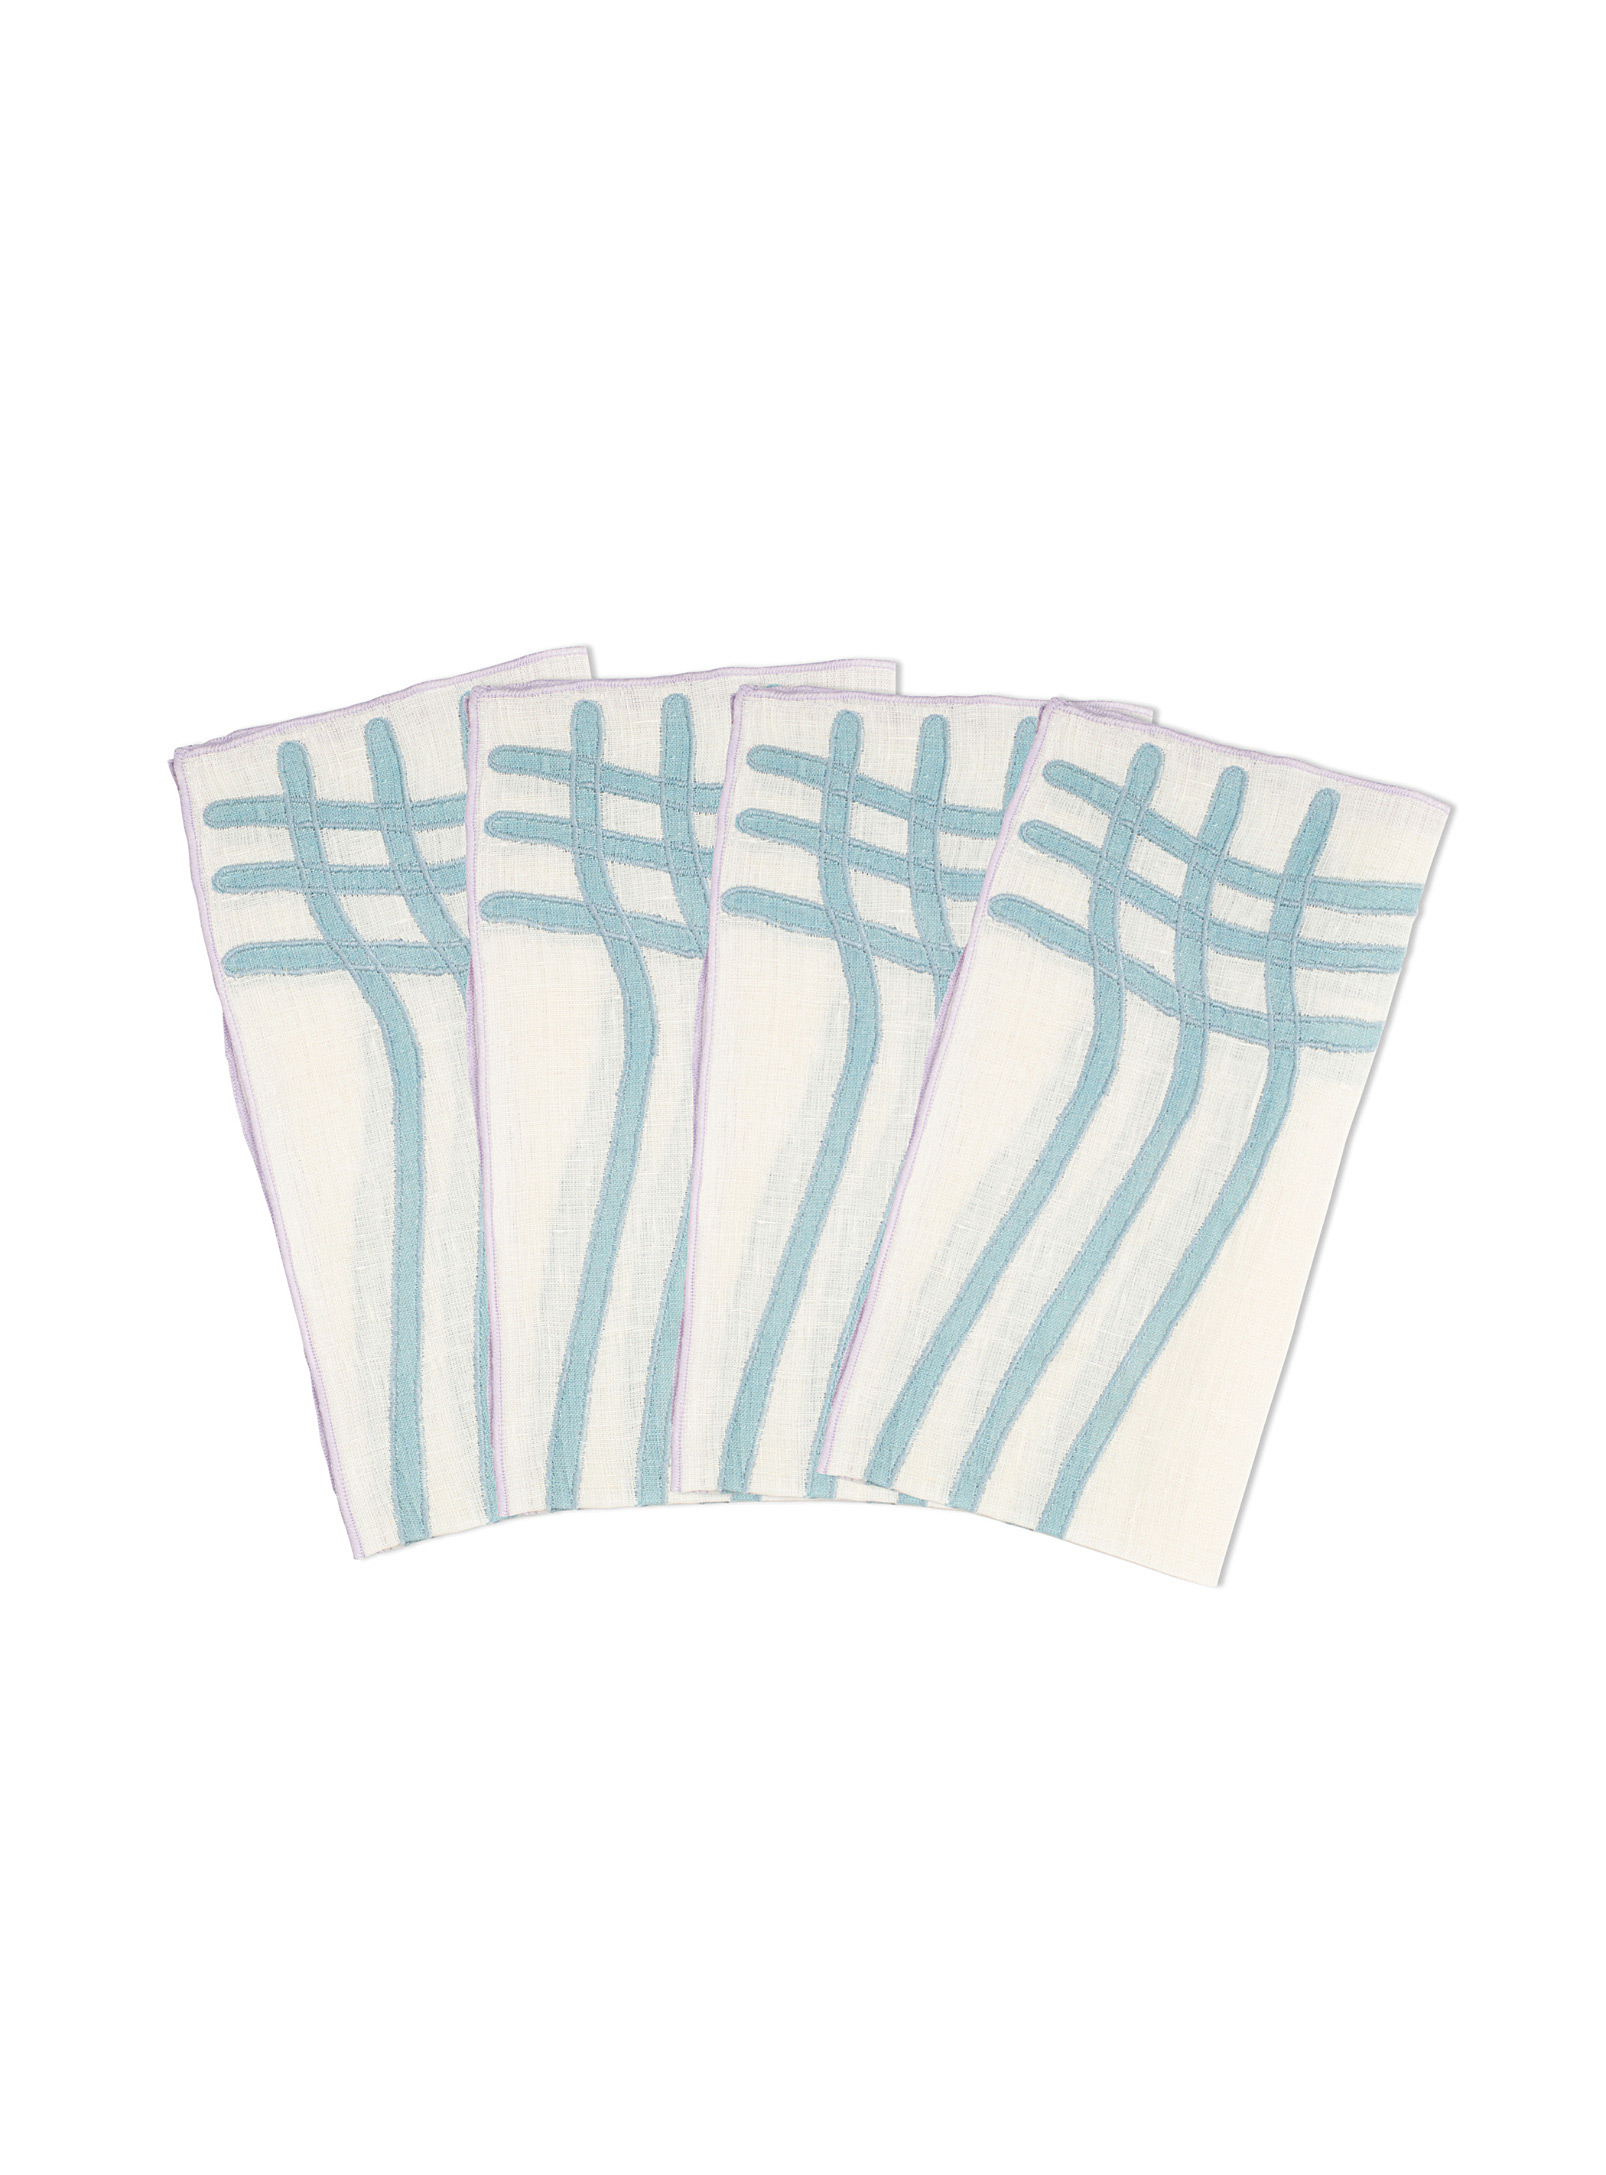 Misette Wavy Checkers Linen Napkins Set Of 4 In Baby Blue